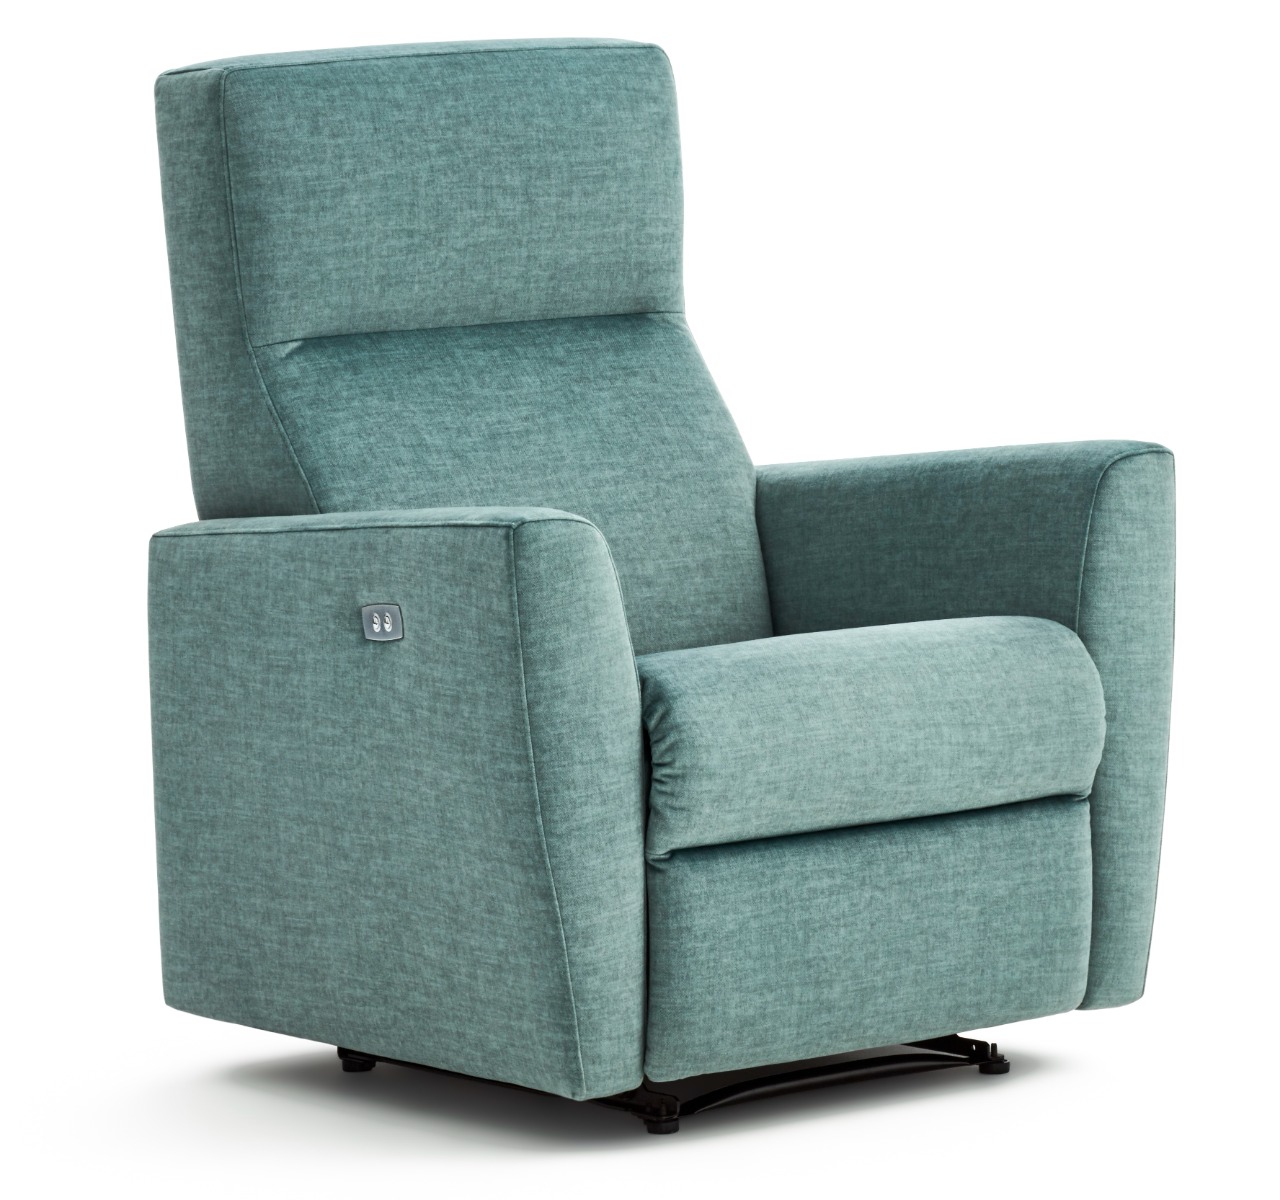 Koan Lift and Rise Recliner